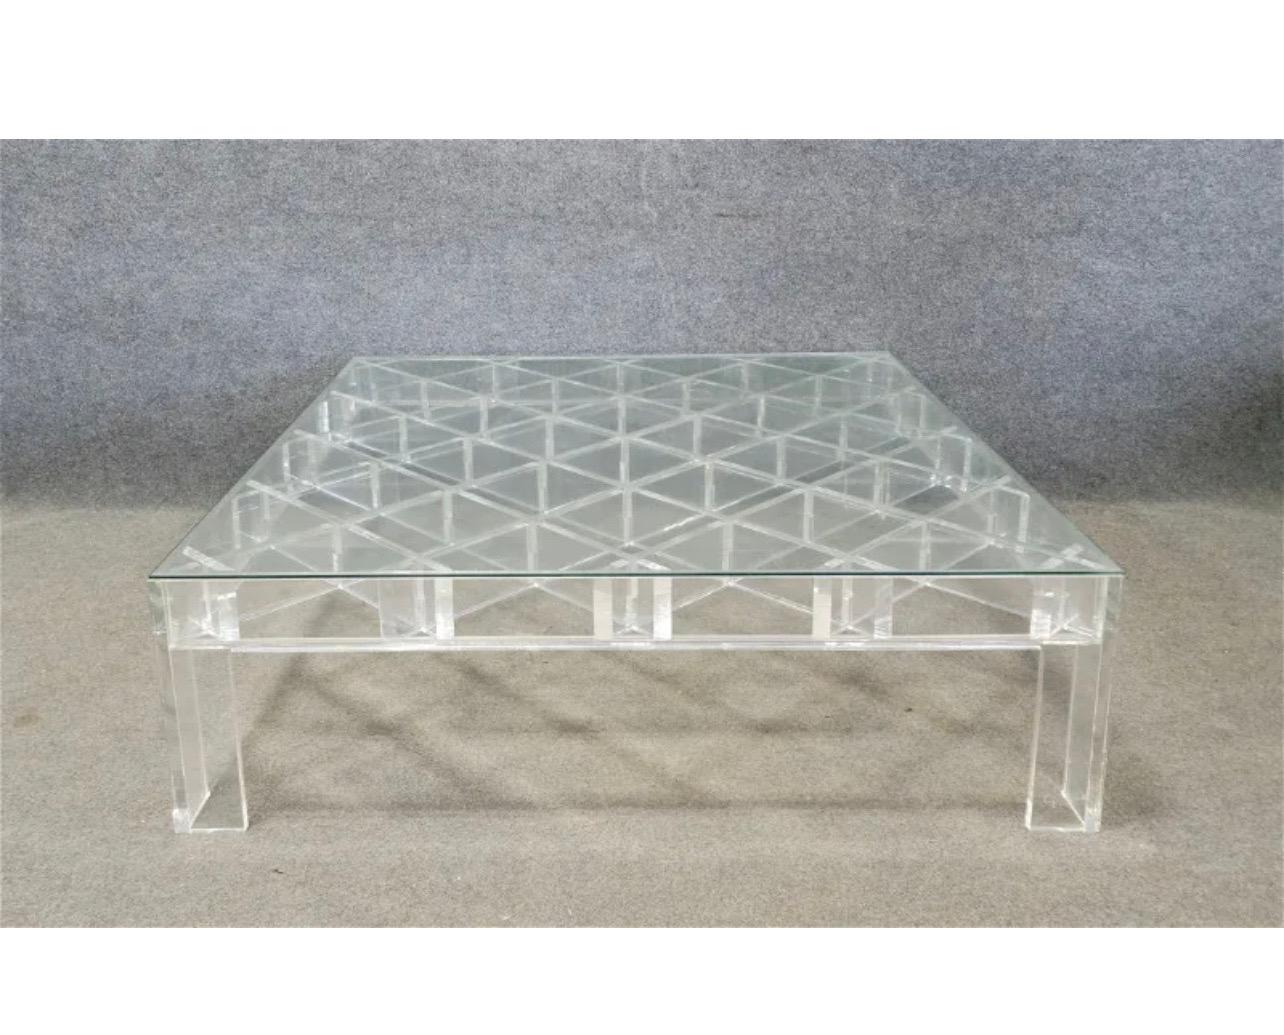 Wonderful Lucite Acrylic Lattice Coffee Table Gary Strutin Charles Hollis Jones In Good Condition For Sale In Roslyn, NY